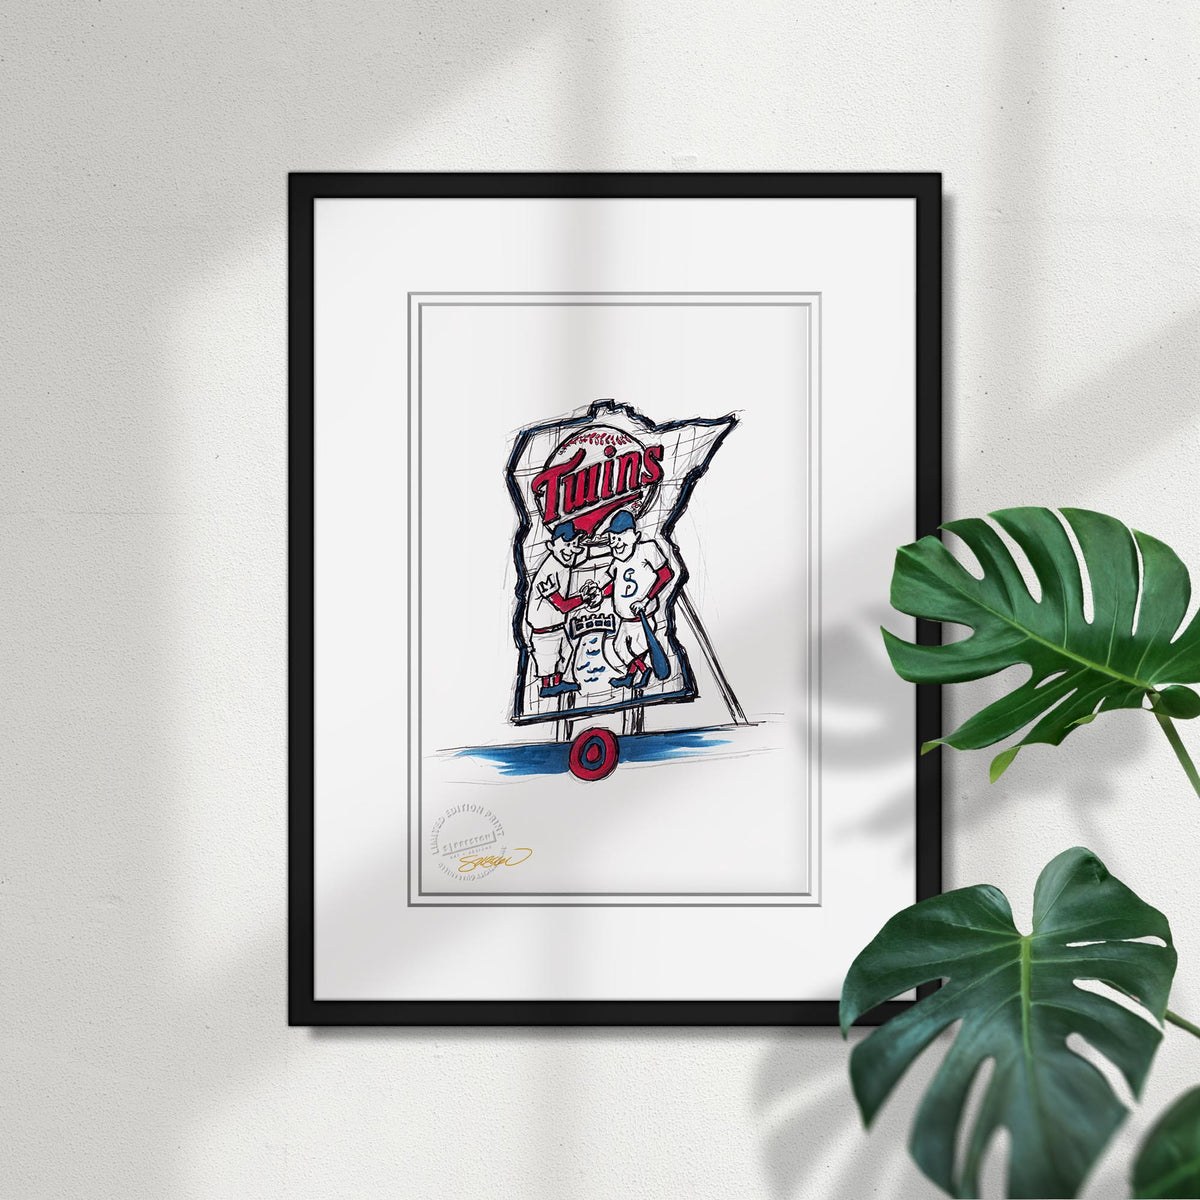 Target Field Ink Sketch (Minnie and Paul) Limited Edition Fine Art Print